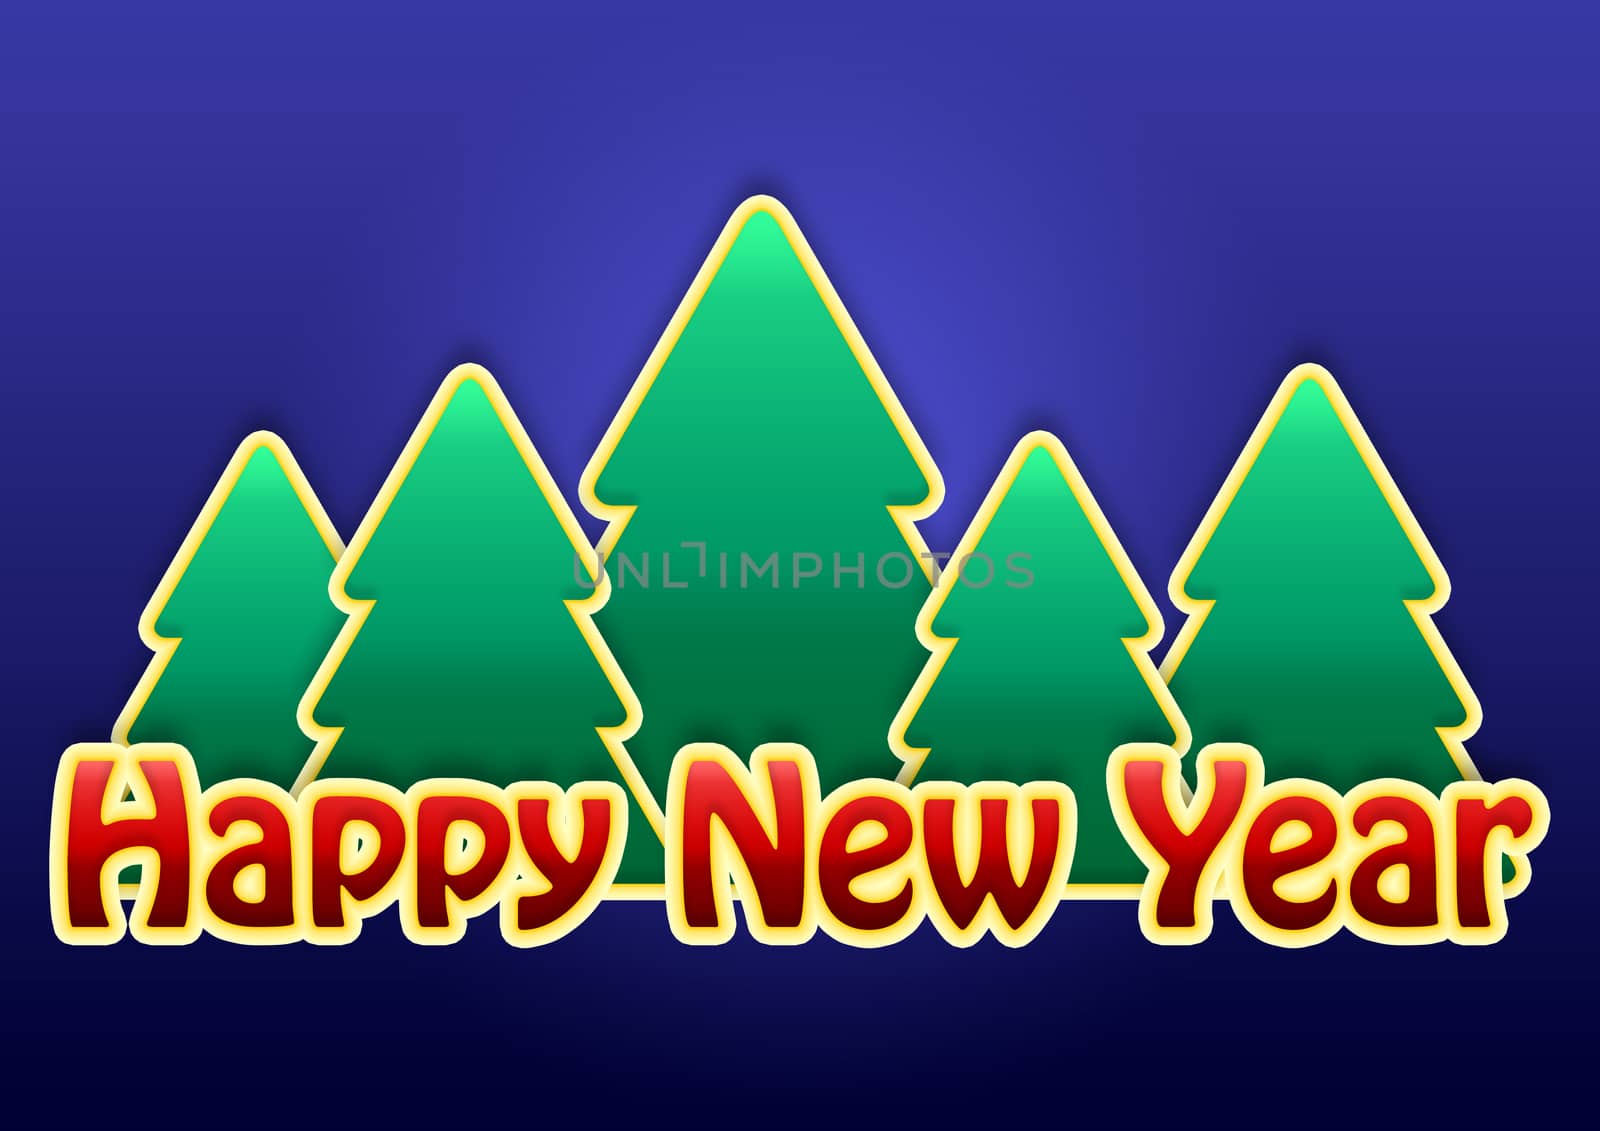 New year background with pine tree. Christmas decoration pattern.